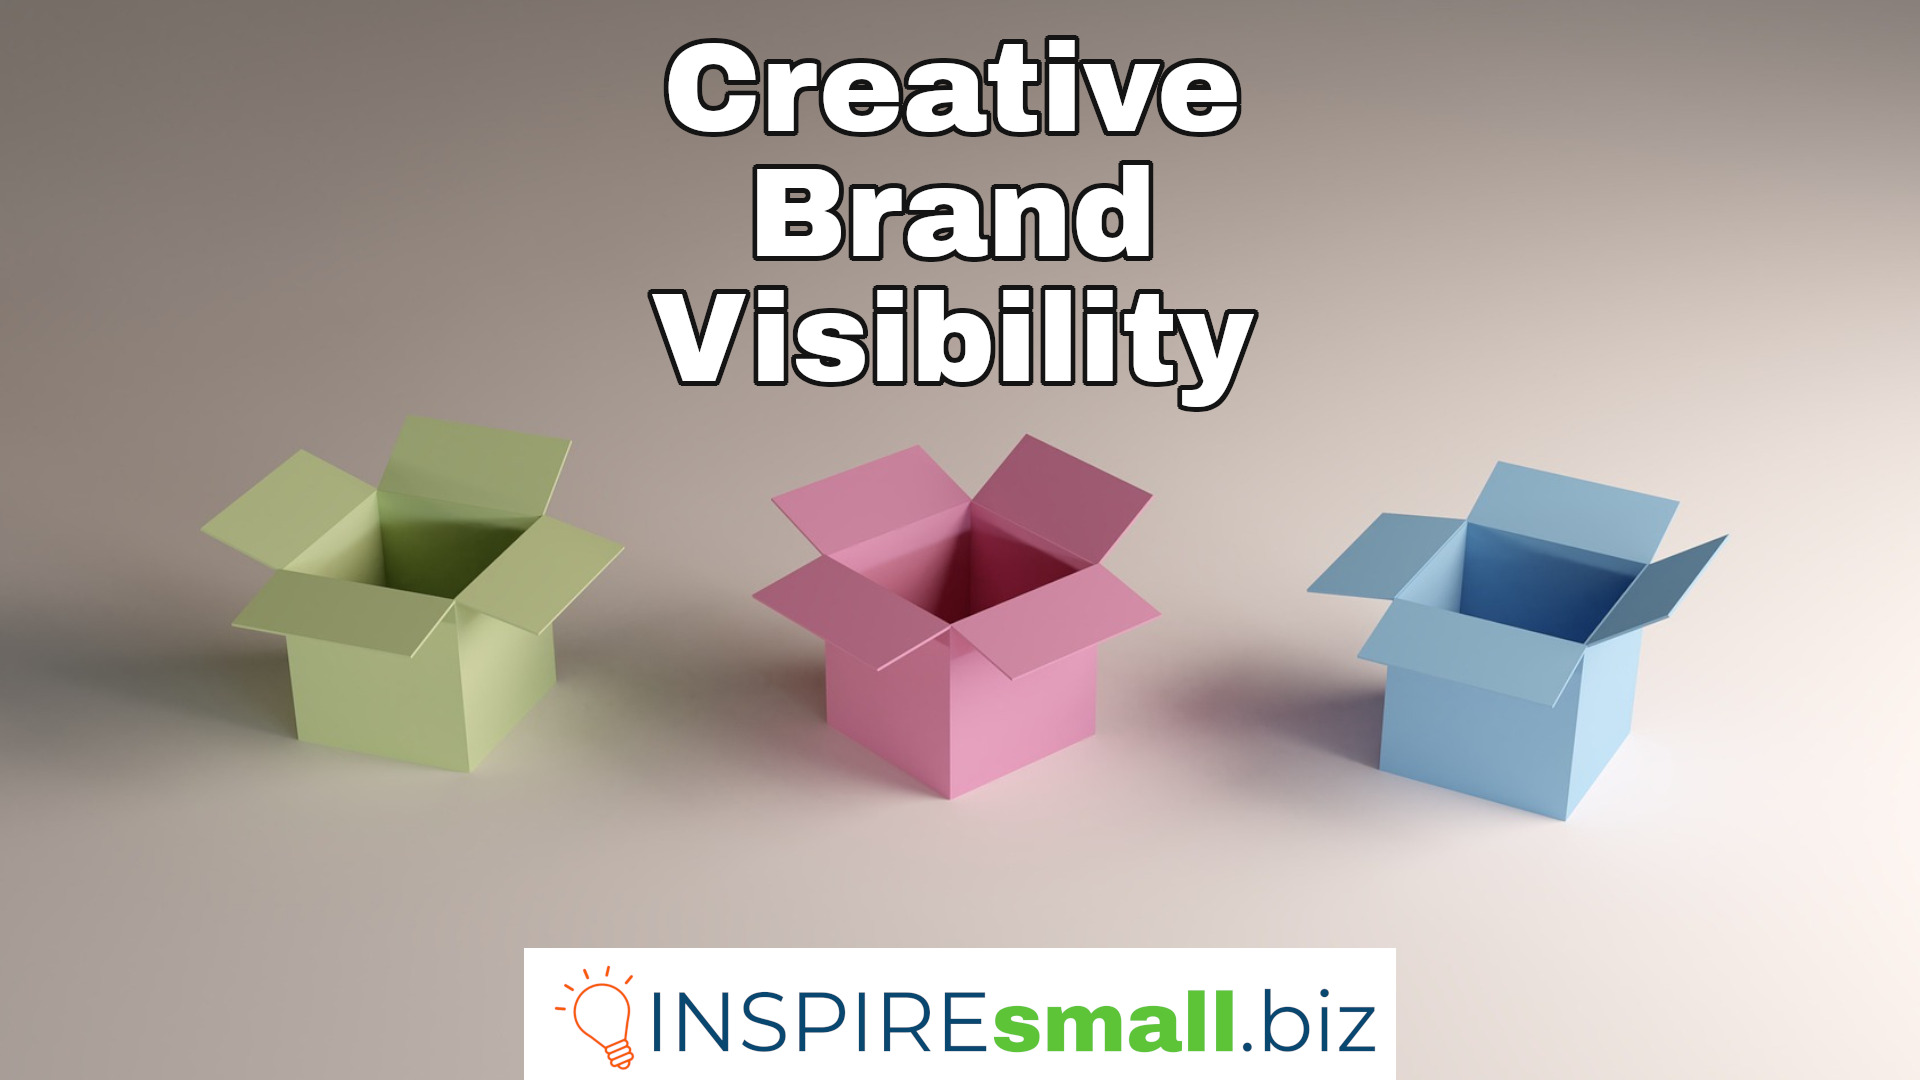 Creative Brand Visibility with Sue Wei, hosted by INSPIREsmall.biz